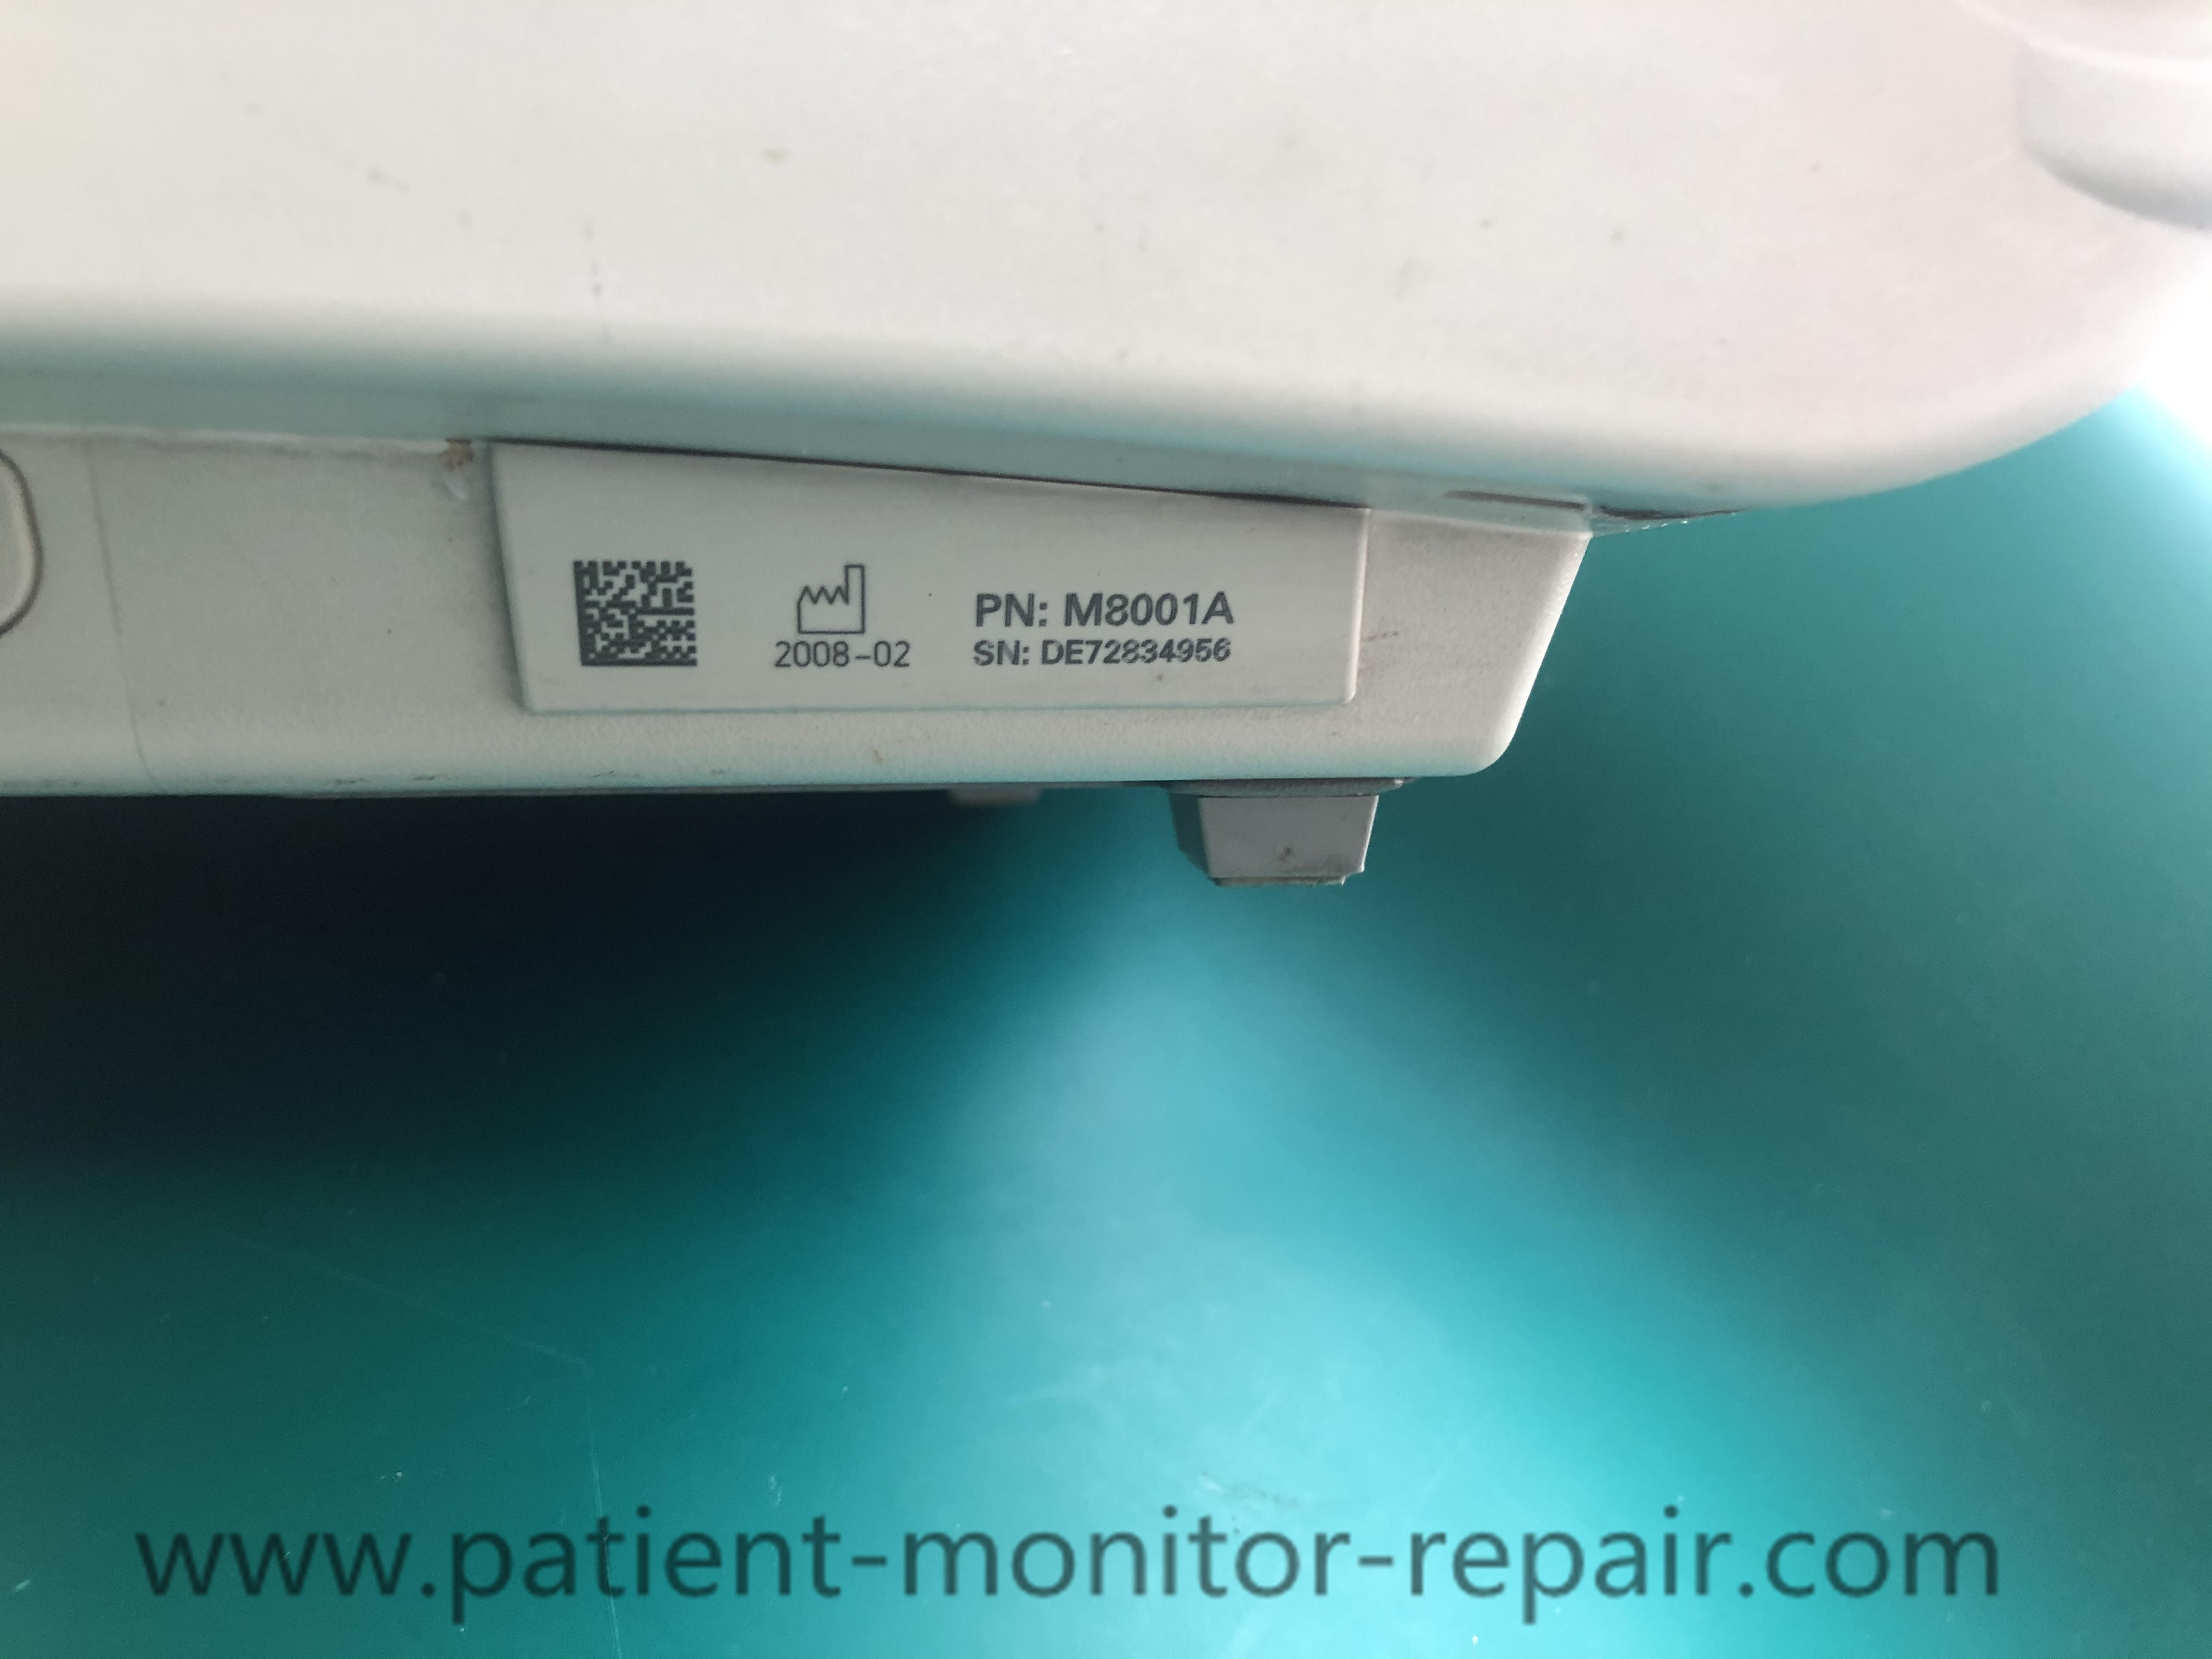 PHILIPS MP20 patient monitor Used M8001A Medical Equipment For Hospital